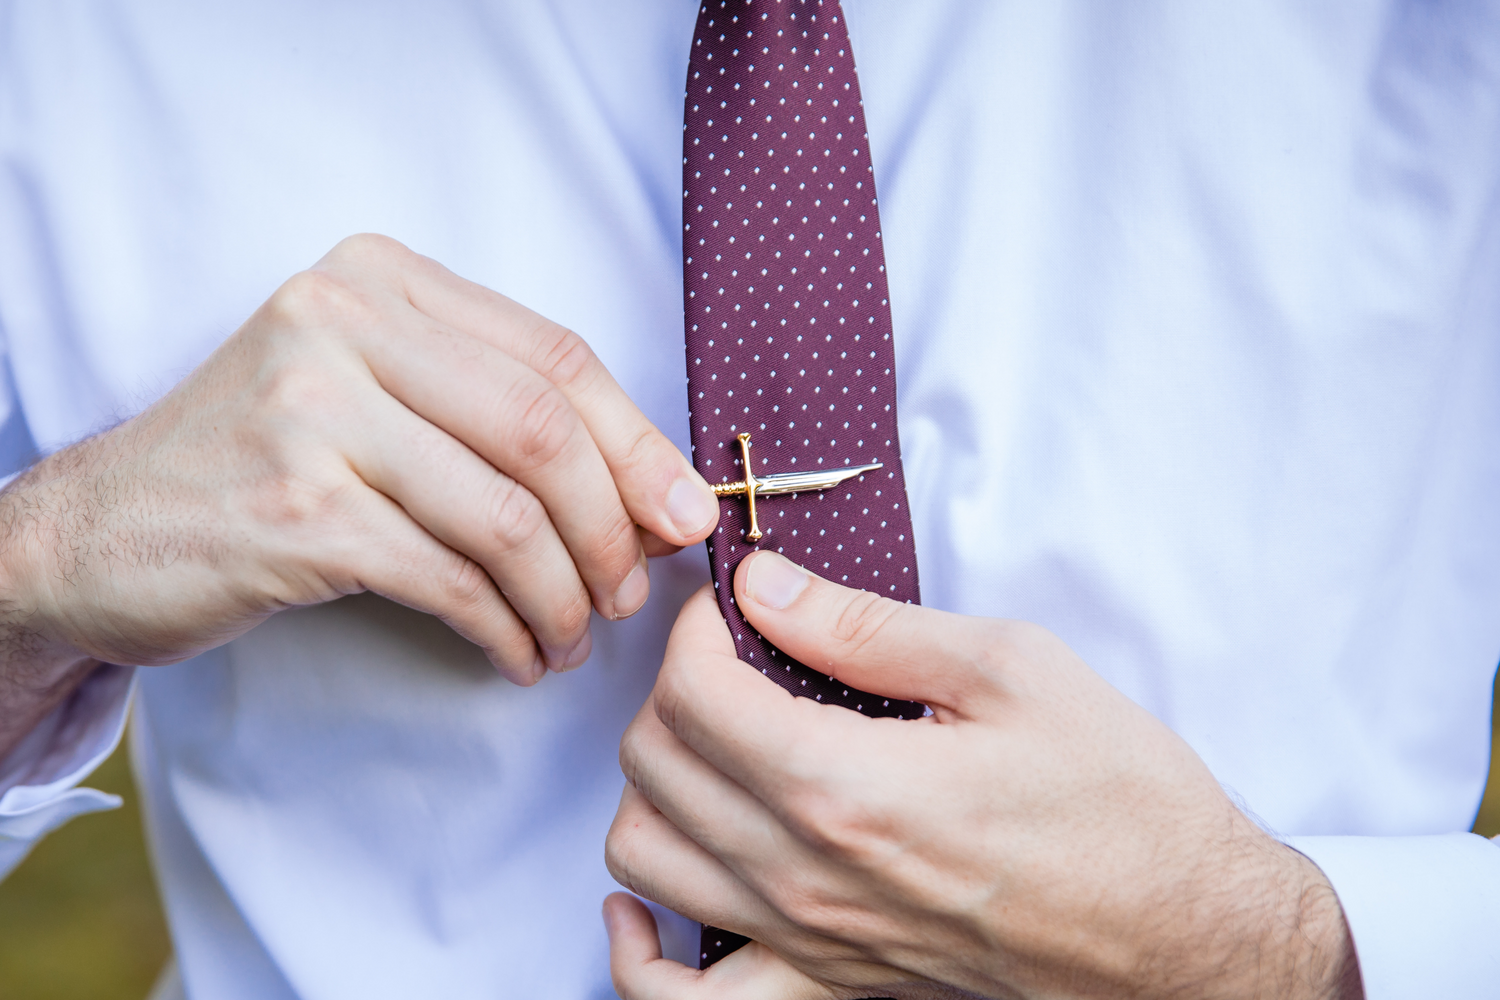 A silver and gold tie clip being clipped to a red tie